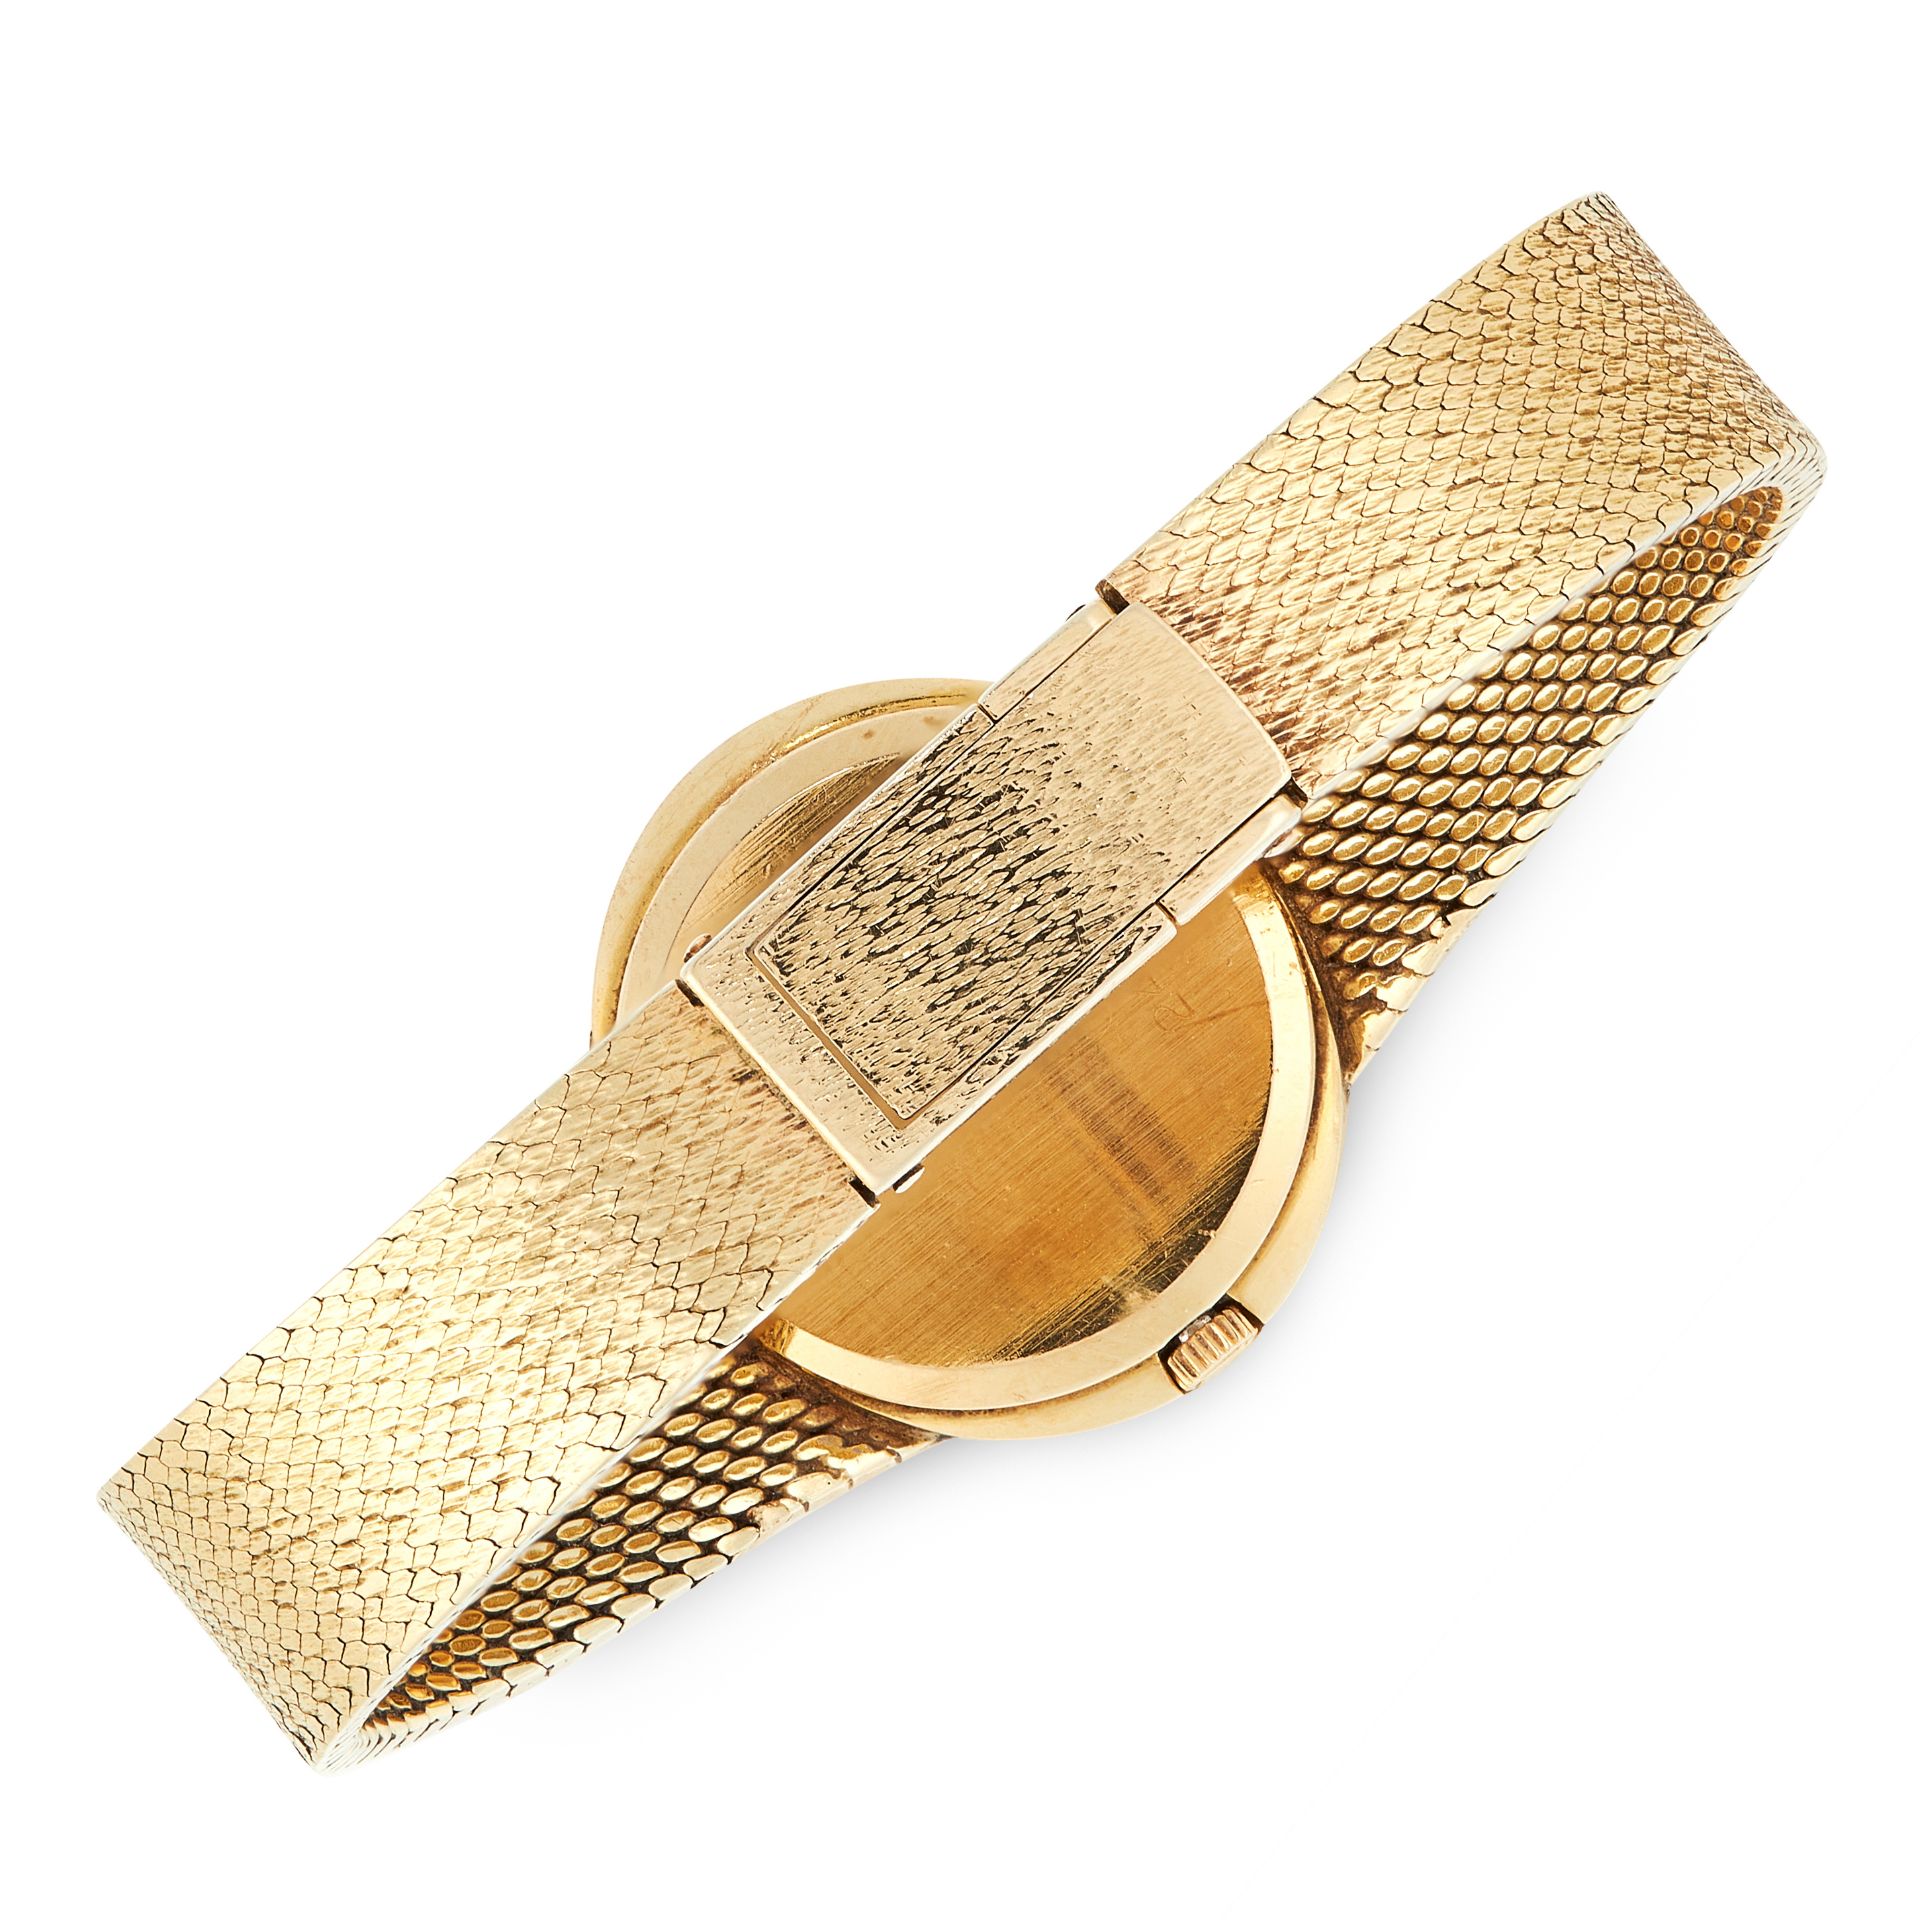 A CELLINI WATCH, ROLEX in 18ct yellow gold, set with an oval dark dial and a textured gold strap, - Image 2 of 2